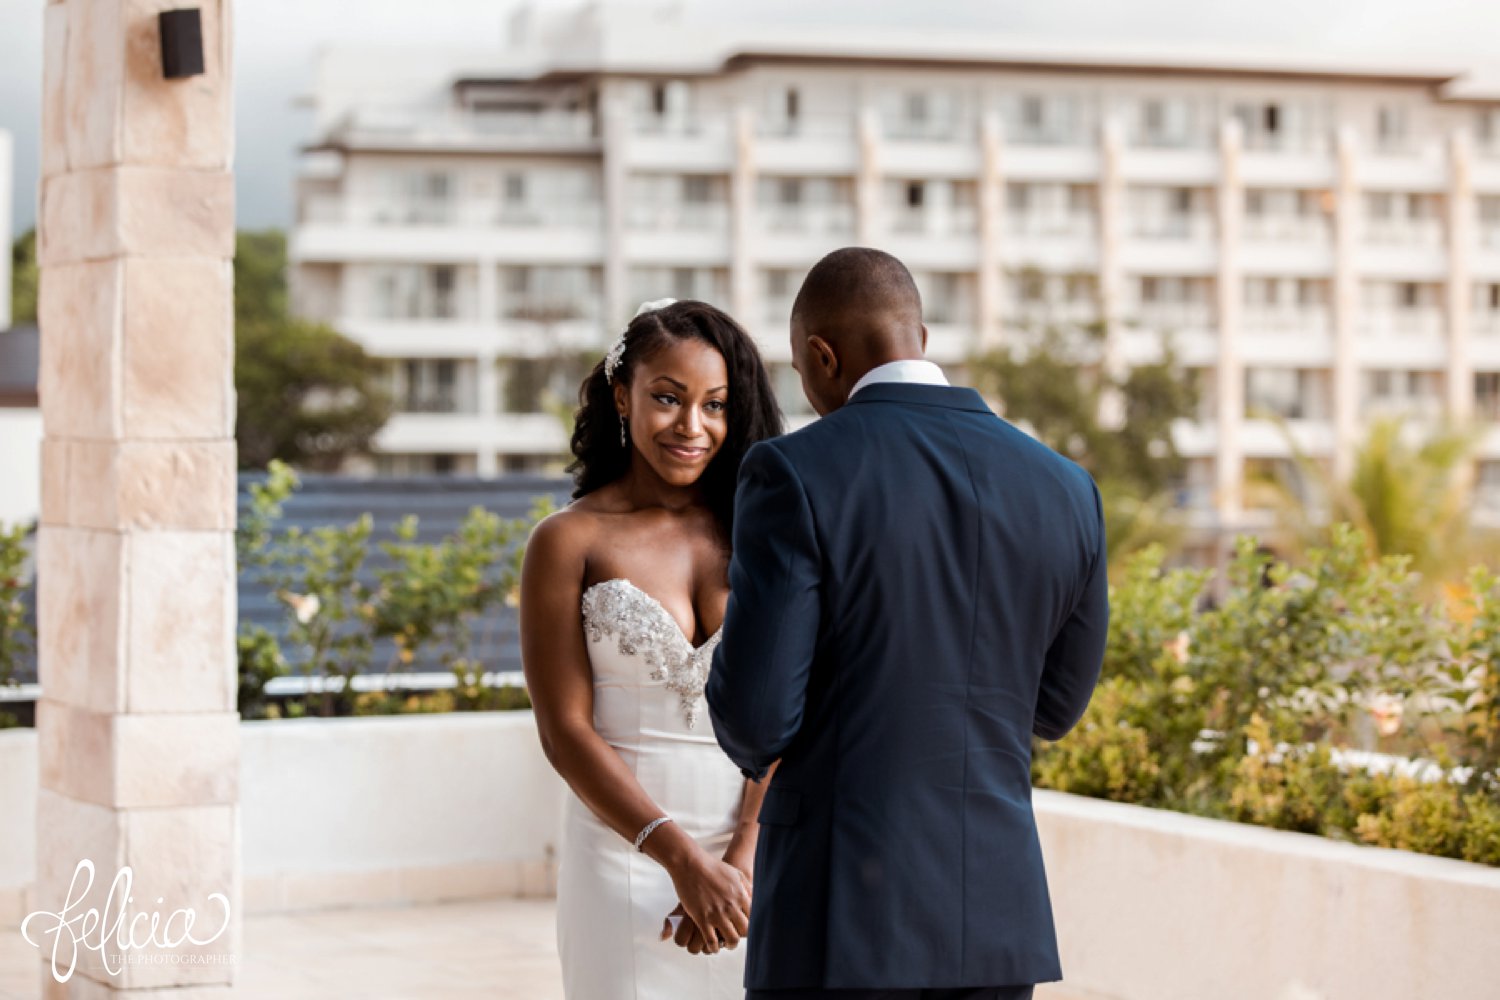   images by feliciathephotographer.com | destination wedding photographer | st lucia | l&s travel | the Royalton | ceremony | exchanging vows | bride and groom | fitting beaded dress | kleinfeld | navy suit | tropical | romantic | 